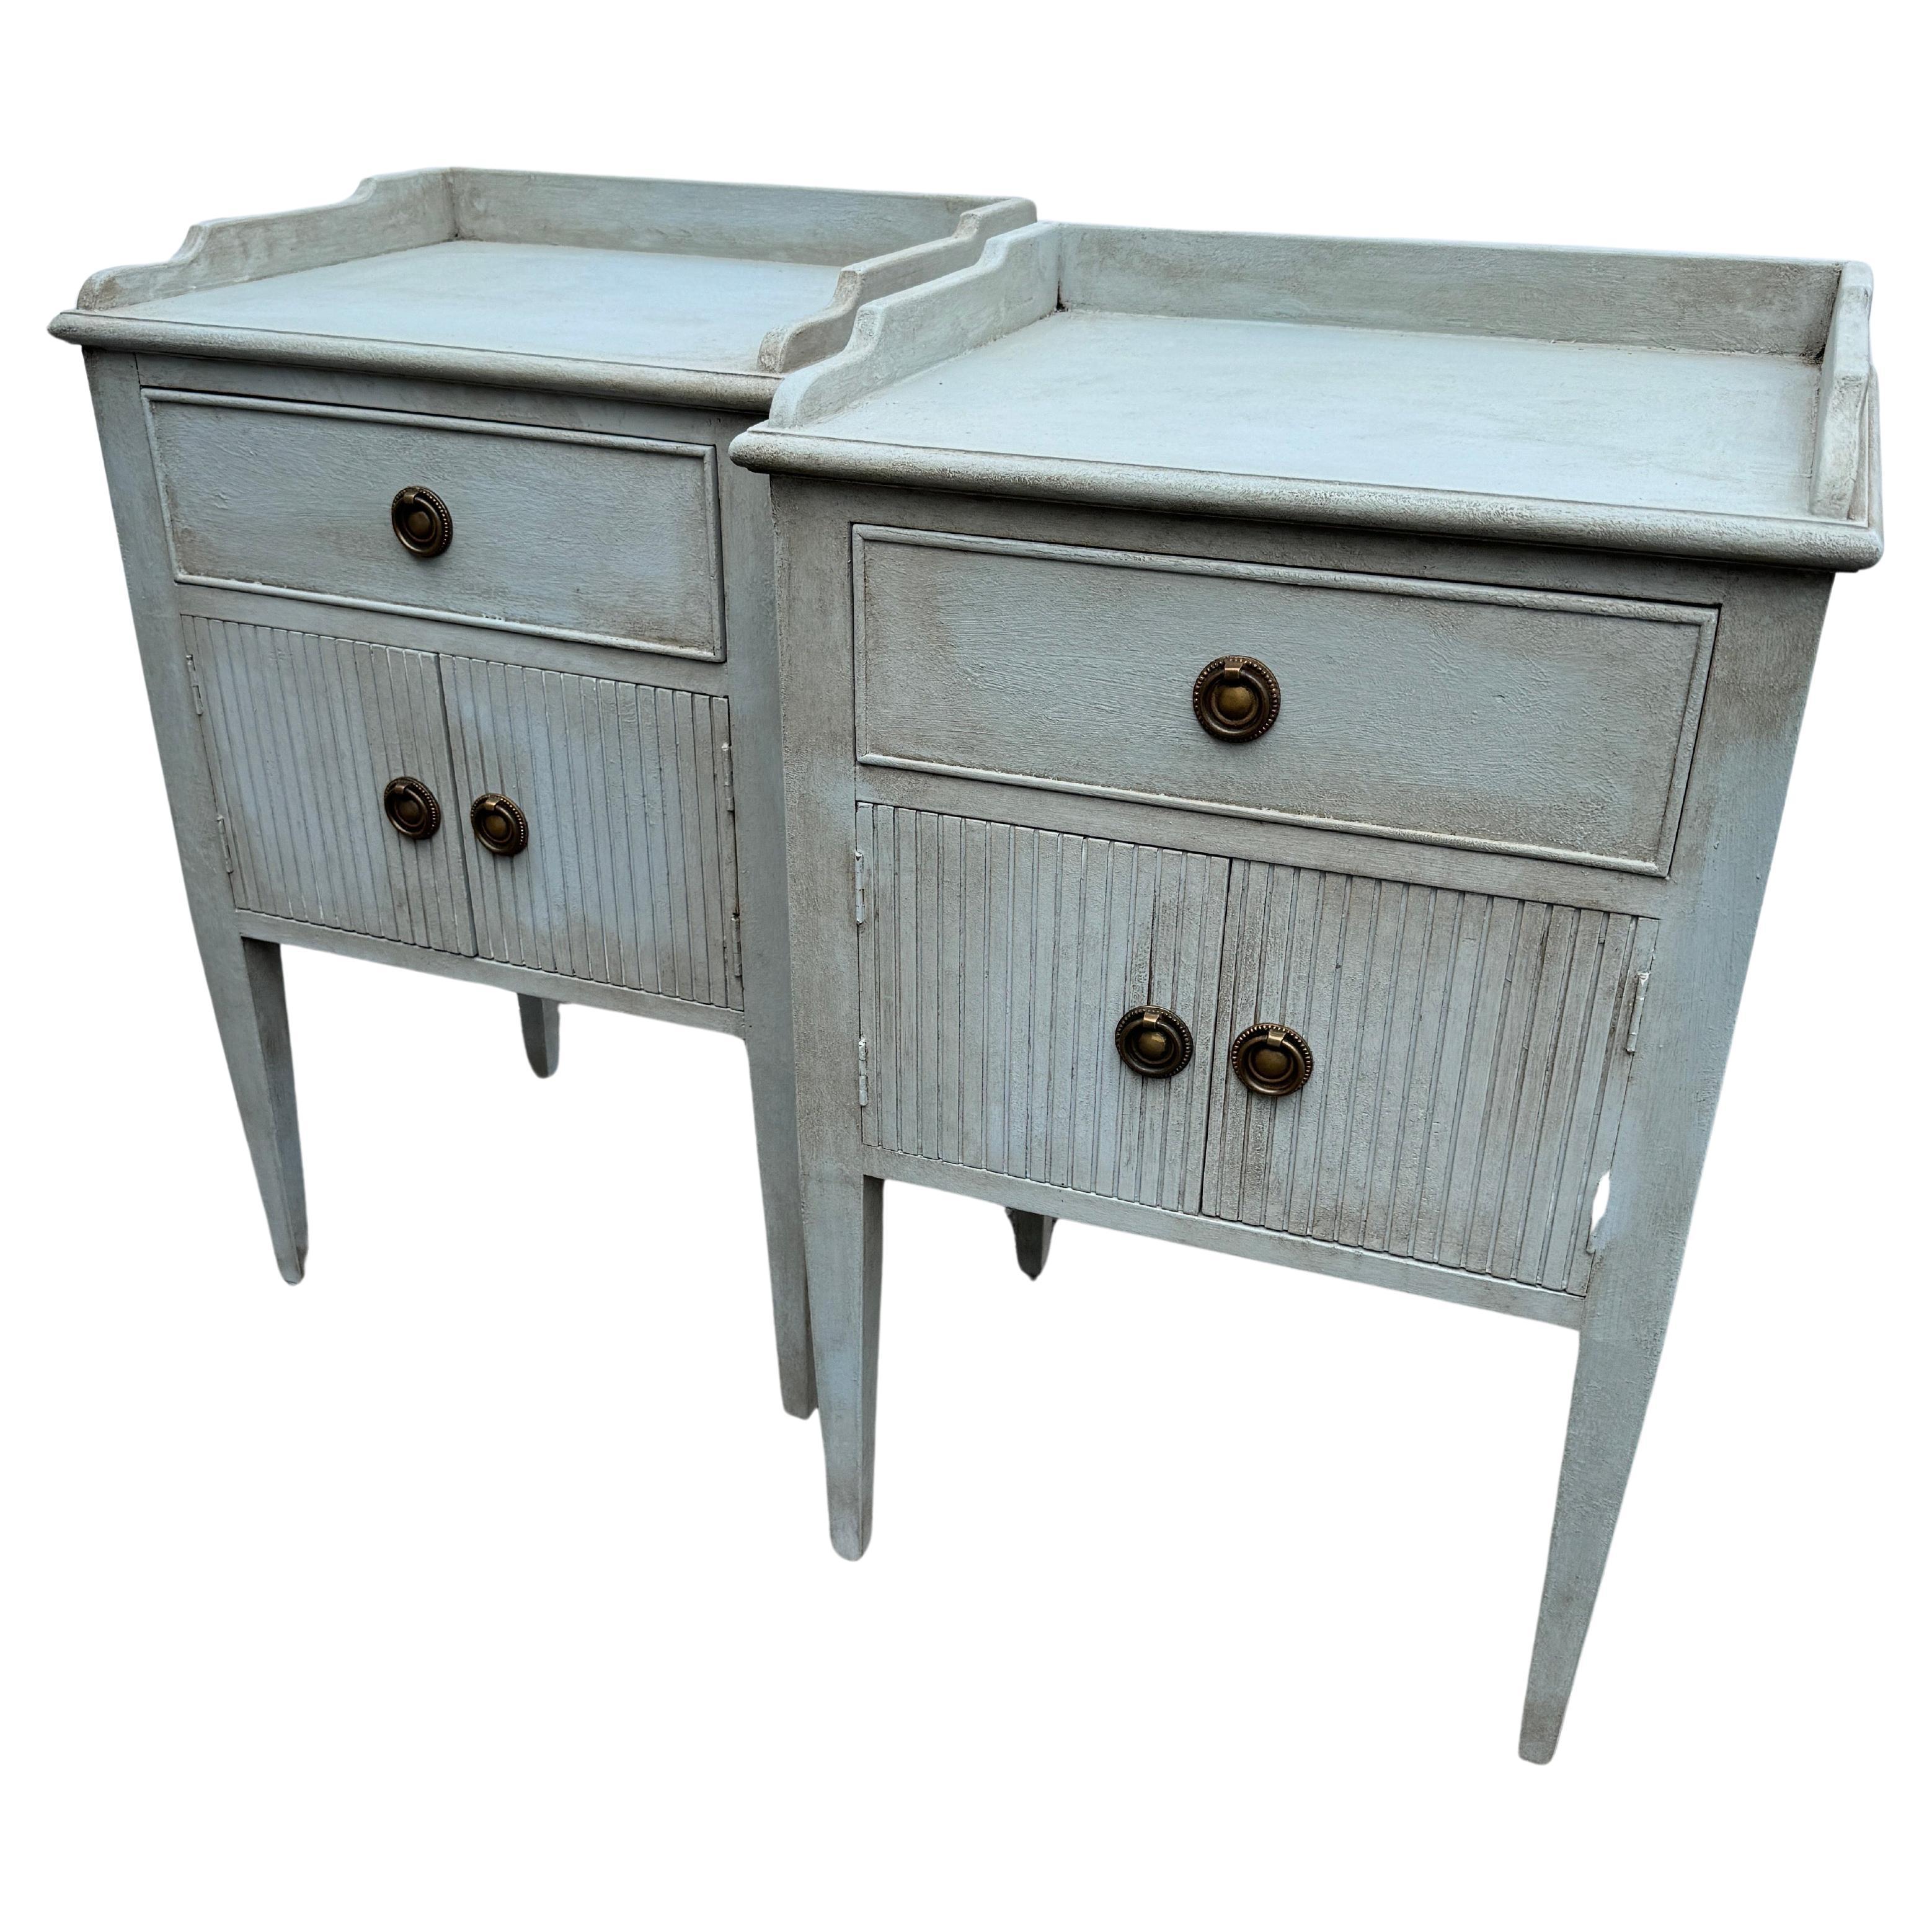 This pair of Swedish style single drawer with cabinet below Swedish blue nightstand or bedside tables have been constructed from solid wood. Classic details on this set including a hand-applied finish and feature bronzed ring hardware. This pair has